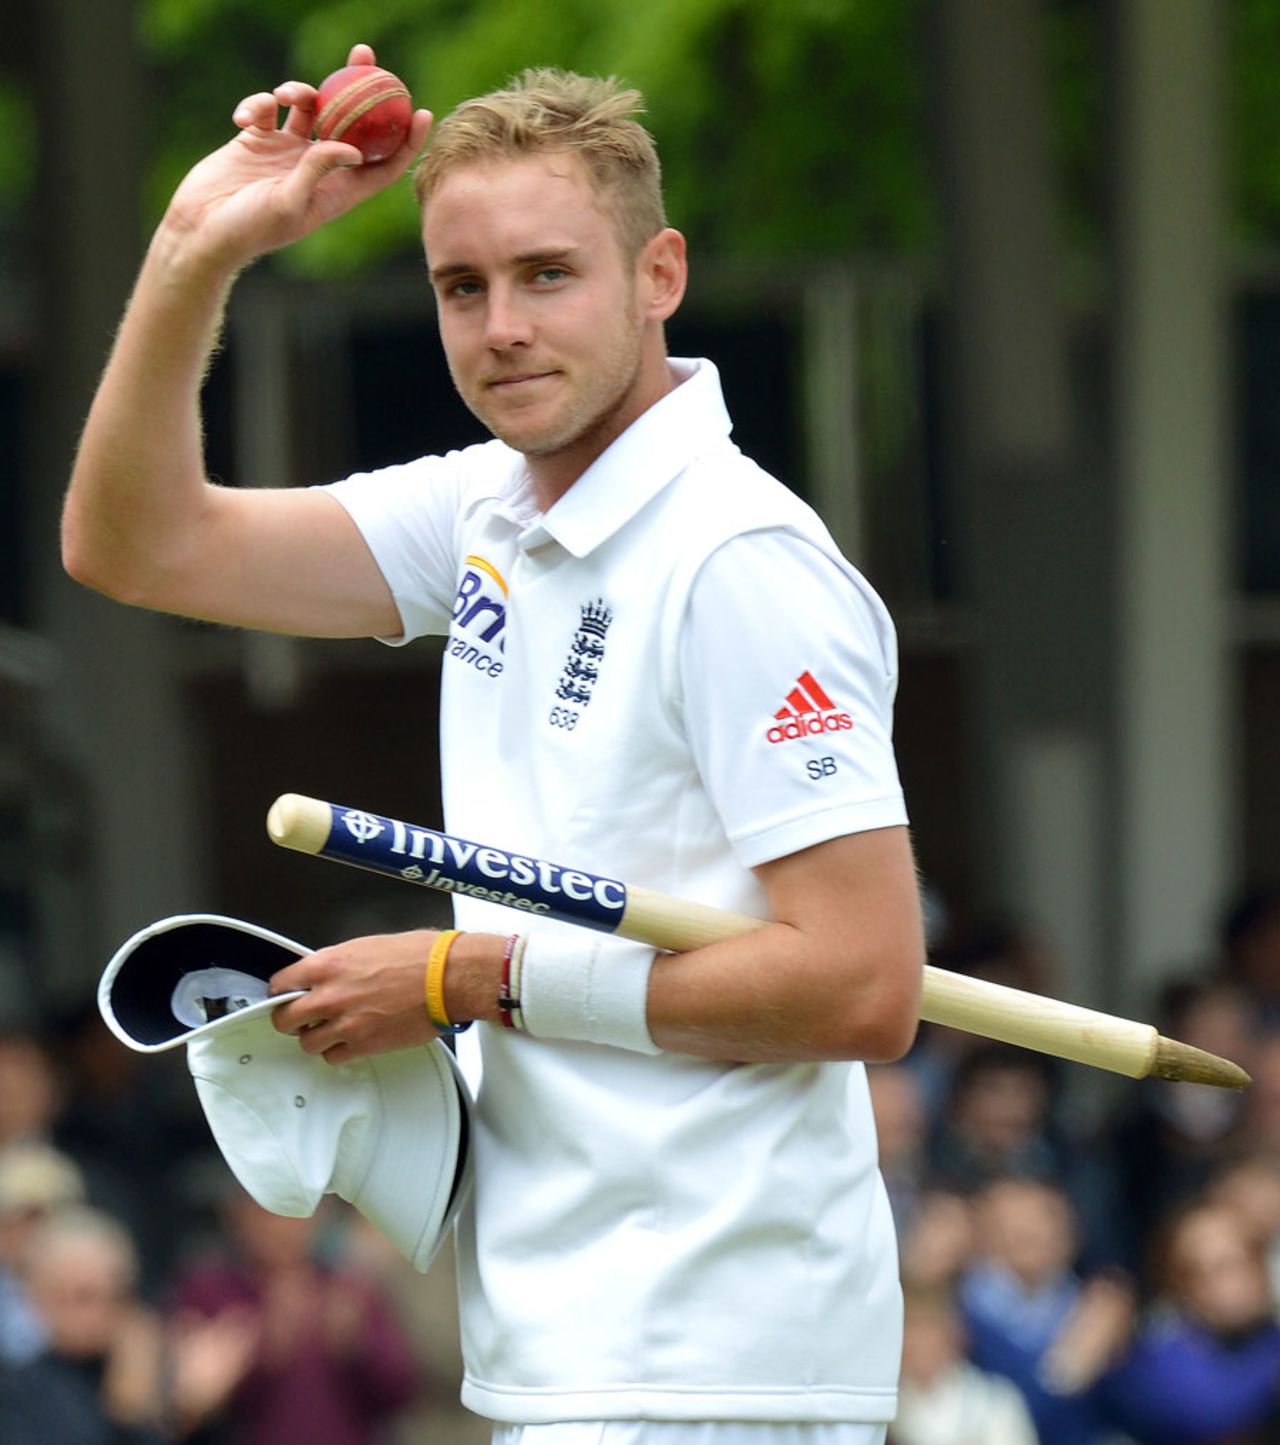 Stuart Broad takes the applause after his career-best 7 for 44, England v New Zealand, 1st Investec Test, Lord's, 4th day, May 19, 2013